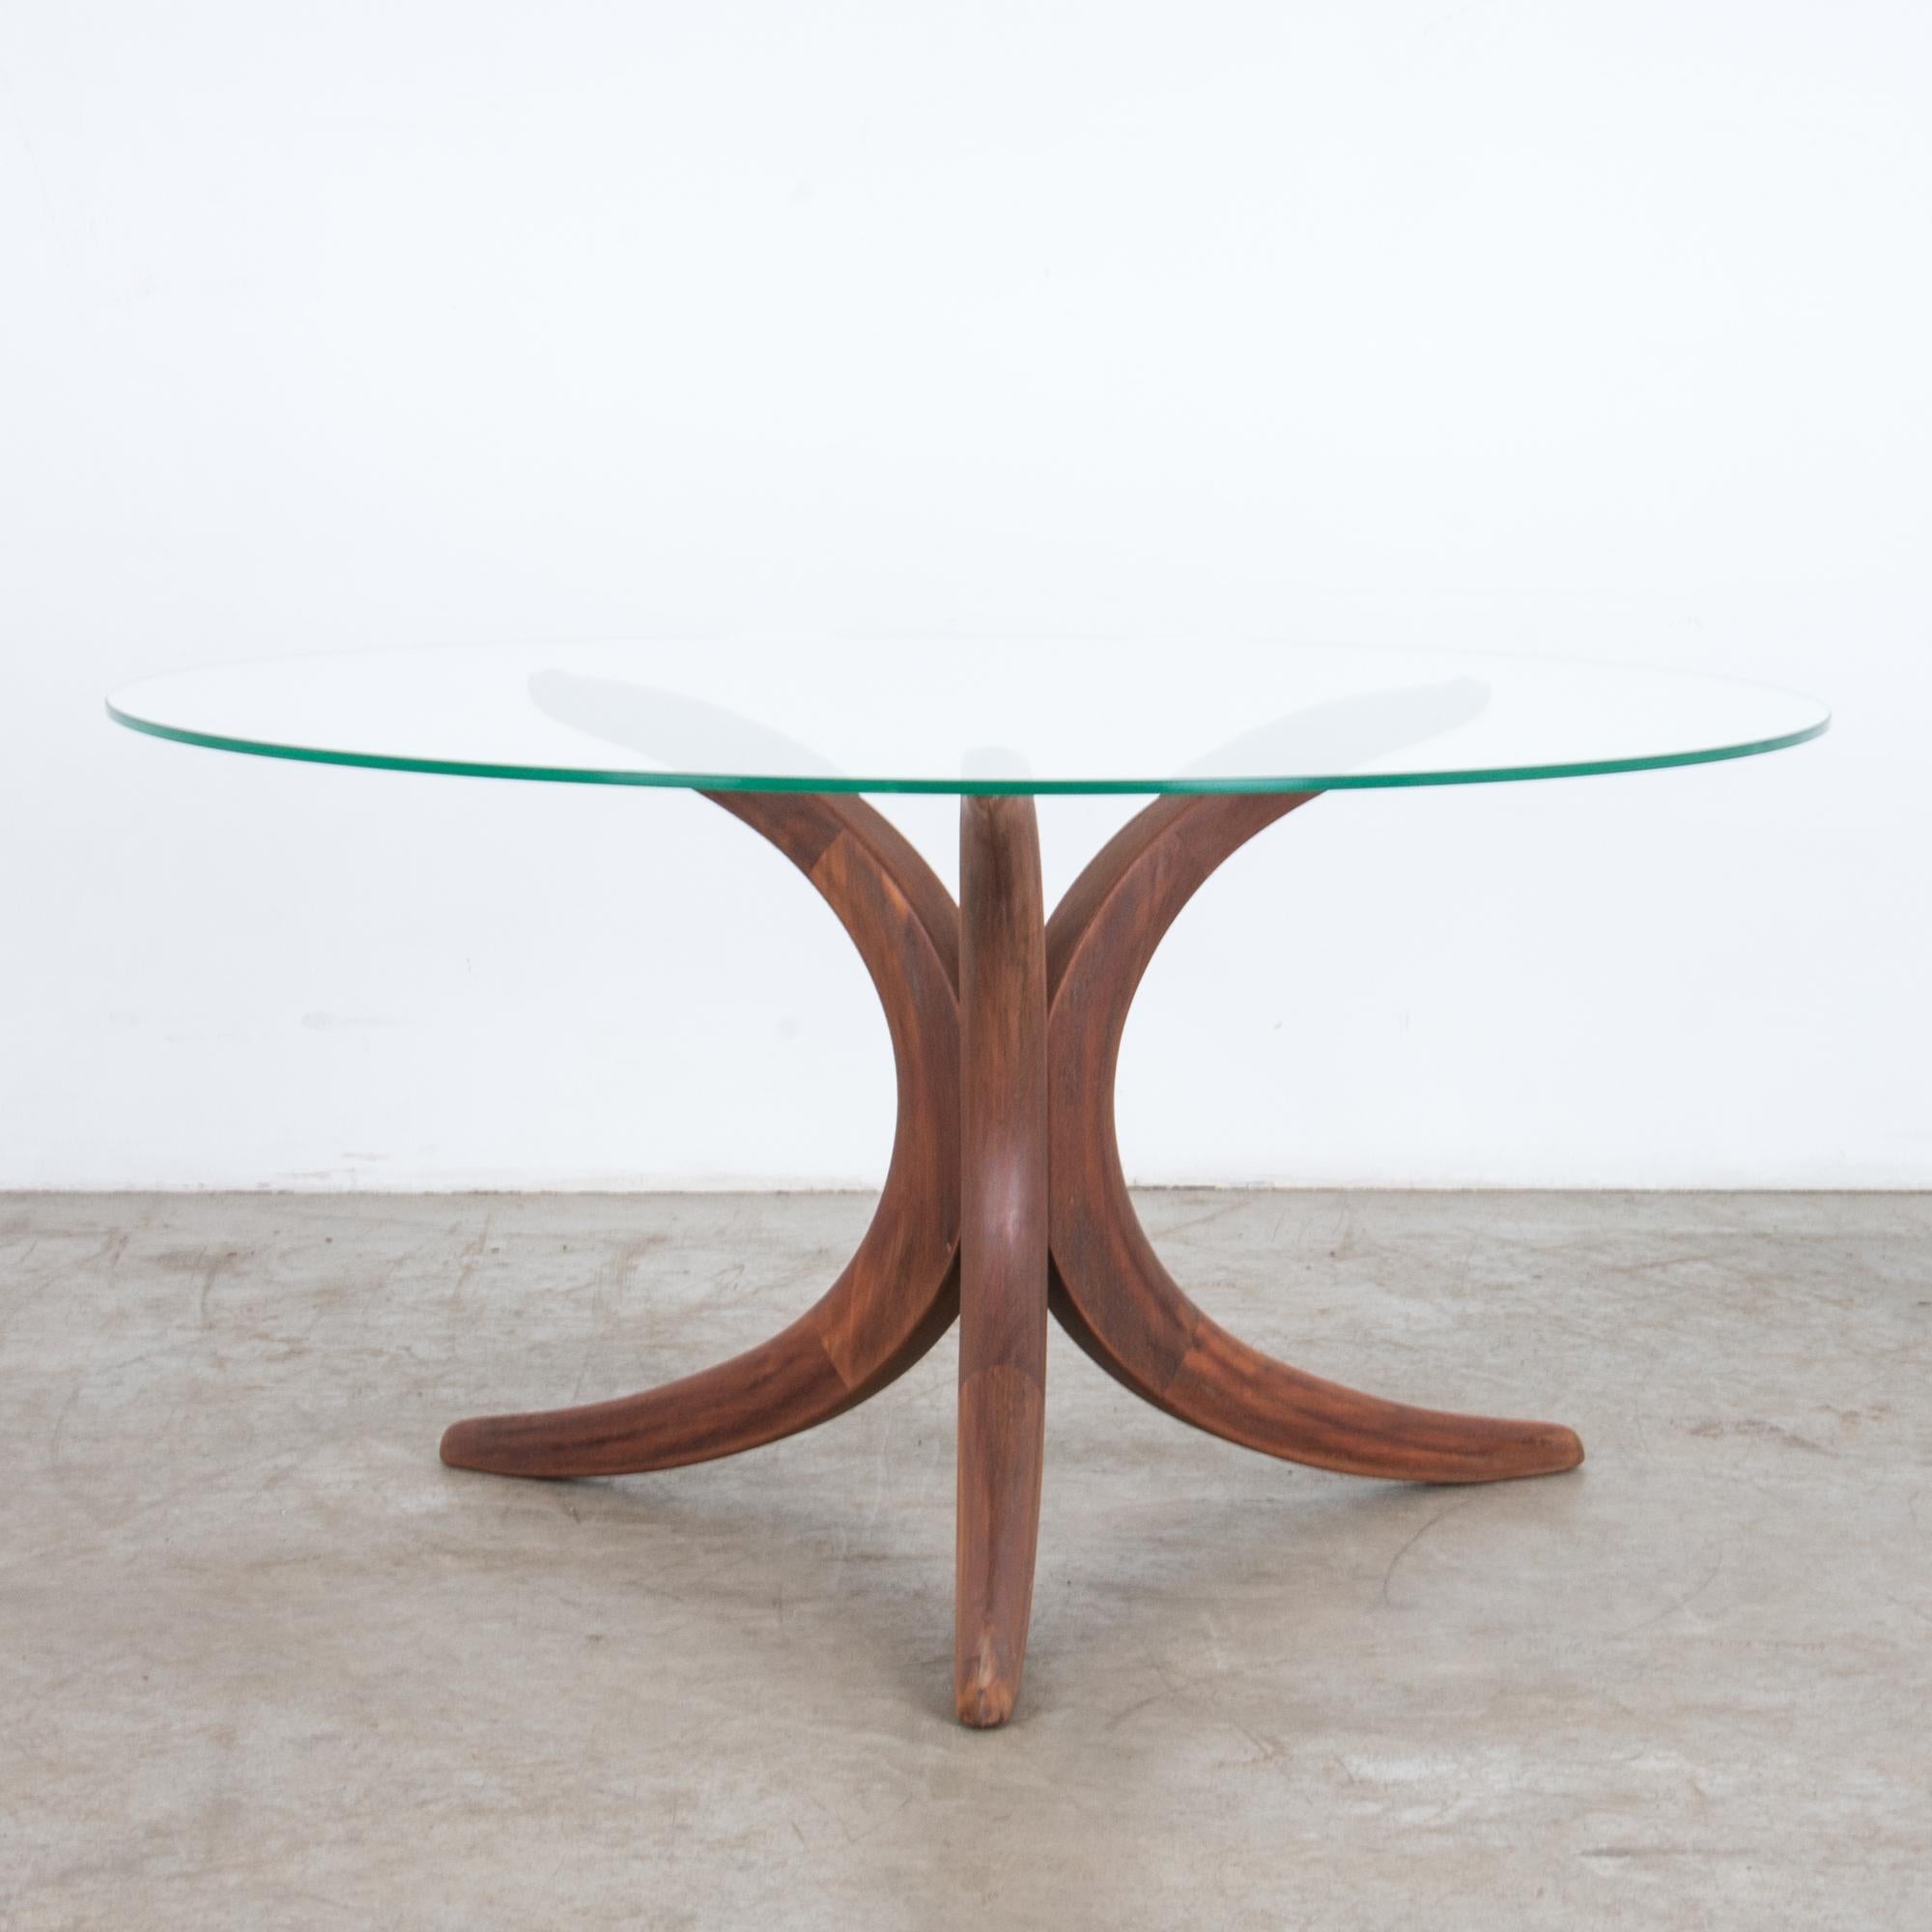 A mid-20th century coffee table from Denmark, circa 1960. In typical modernist style, this table is composed with simple geometric shapes, elegantly composed in restrained natural tones, accentuating the materials and quality of craftsmanship.